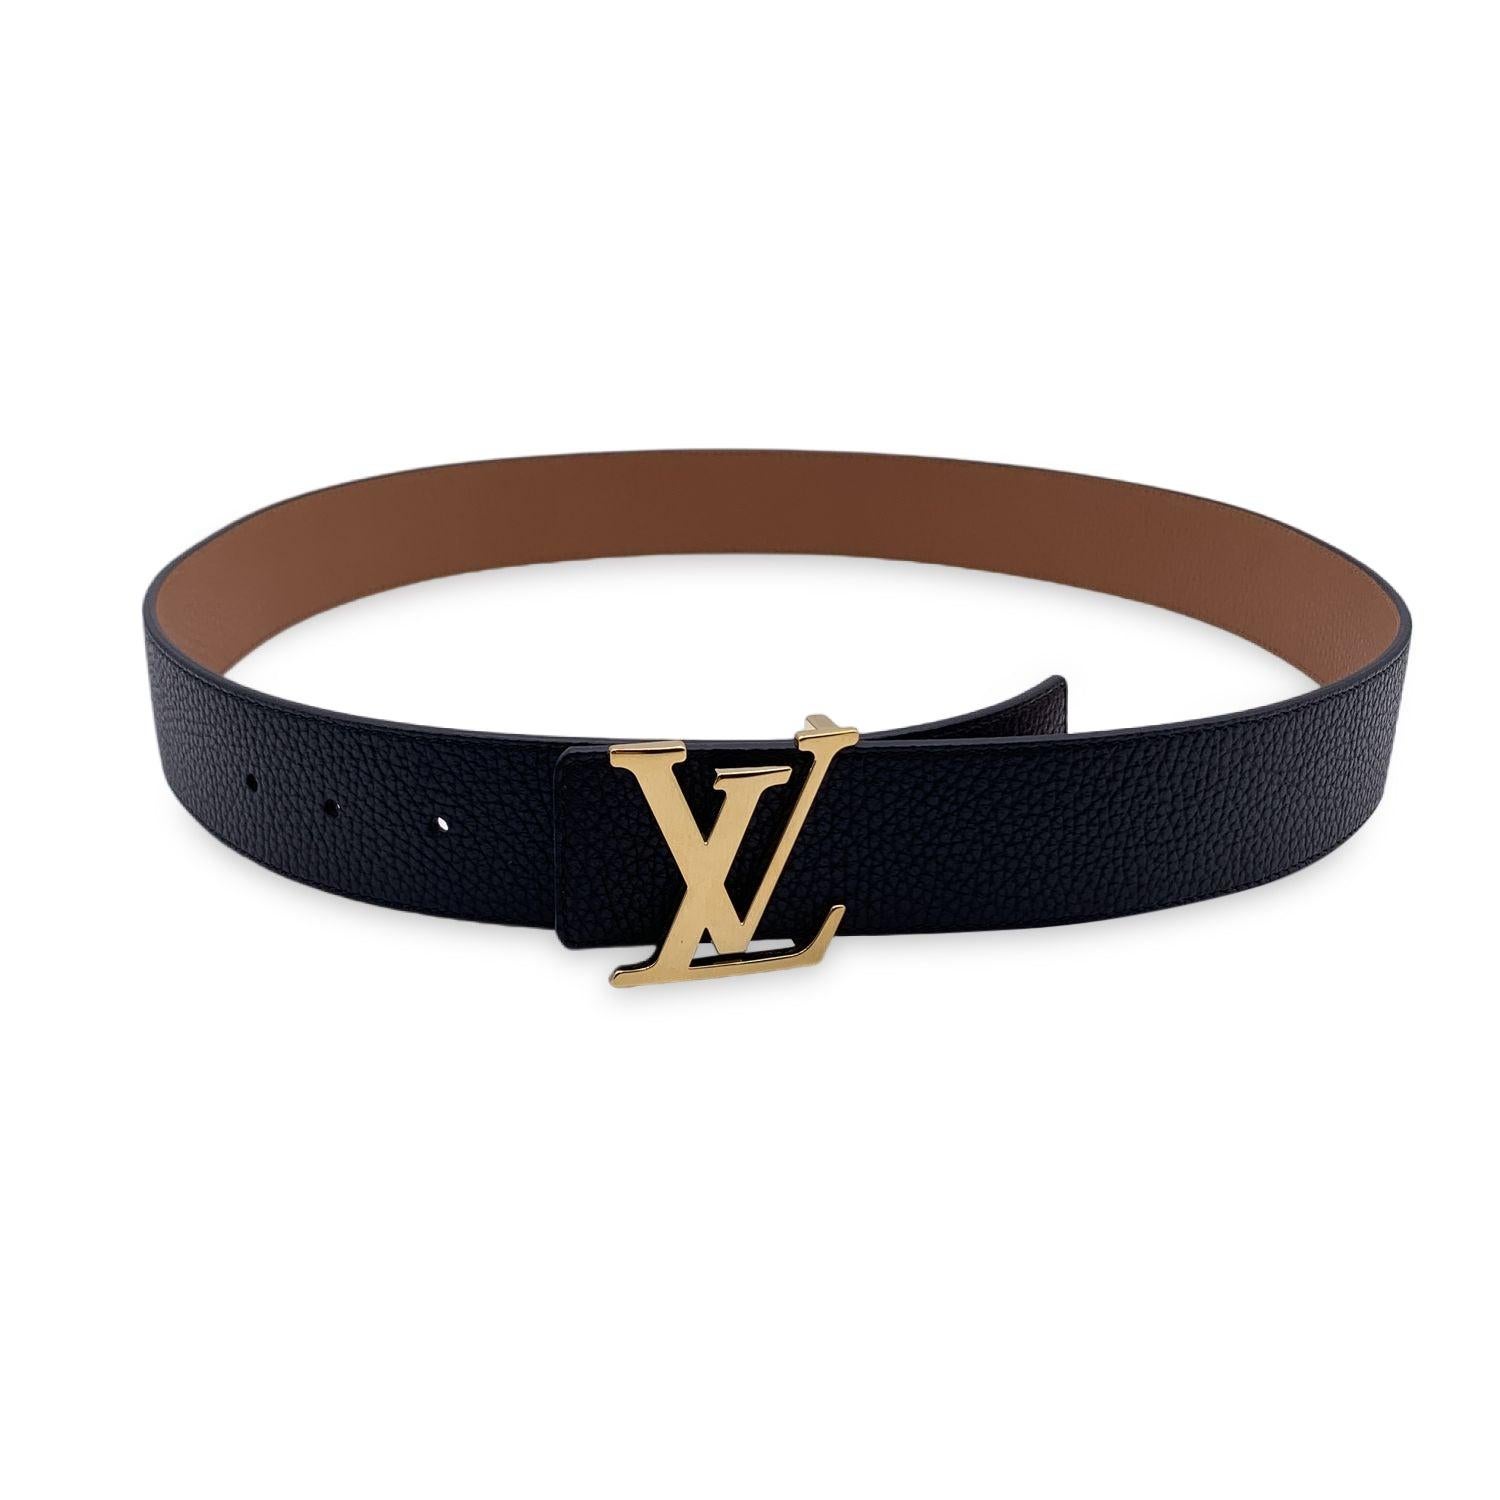 This beautiful Belt will come with a Certificate of Authenticity provided by Entrupy, The certificate will be provided at no further cost.

LOUIS VUITTON reversible 'LV Initiales' belt. Made of fine black and beige Taurillon leather. The belt